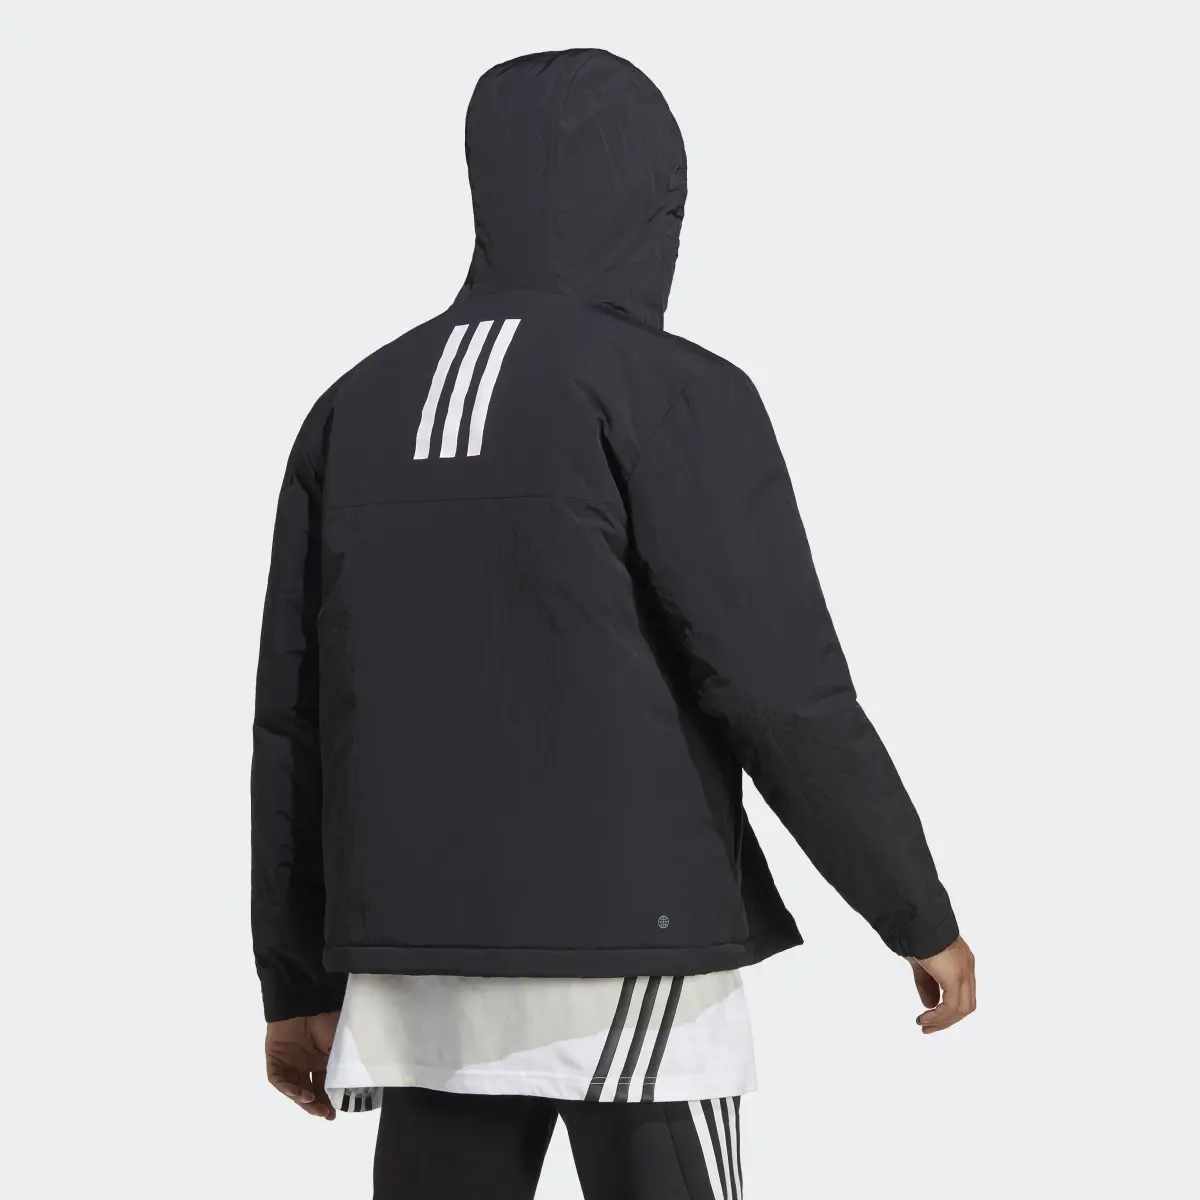 Adidas BSC Sturdy Insulated Hooded Jacket. 3